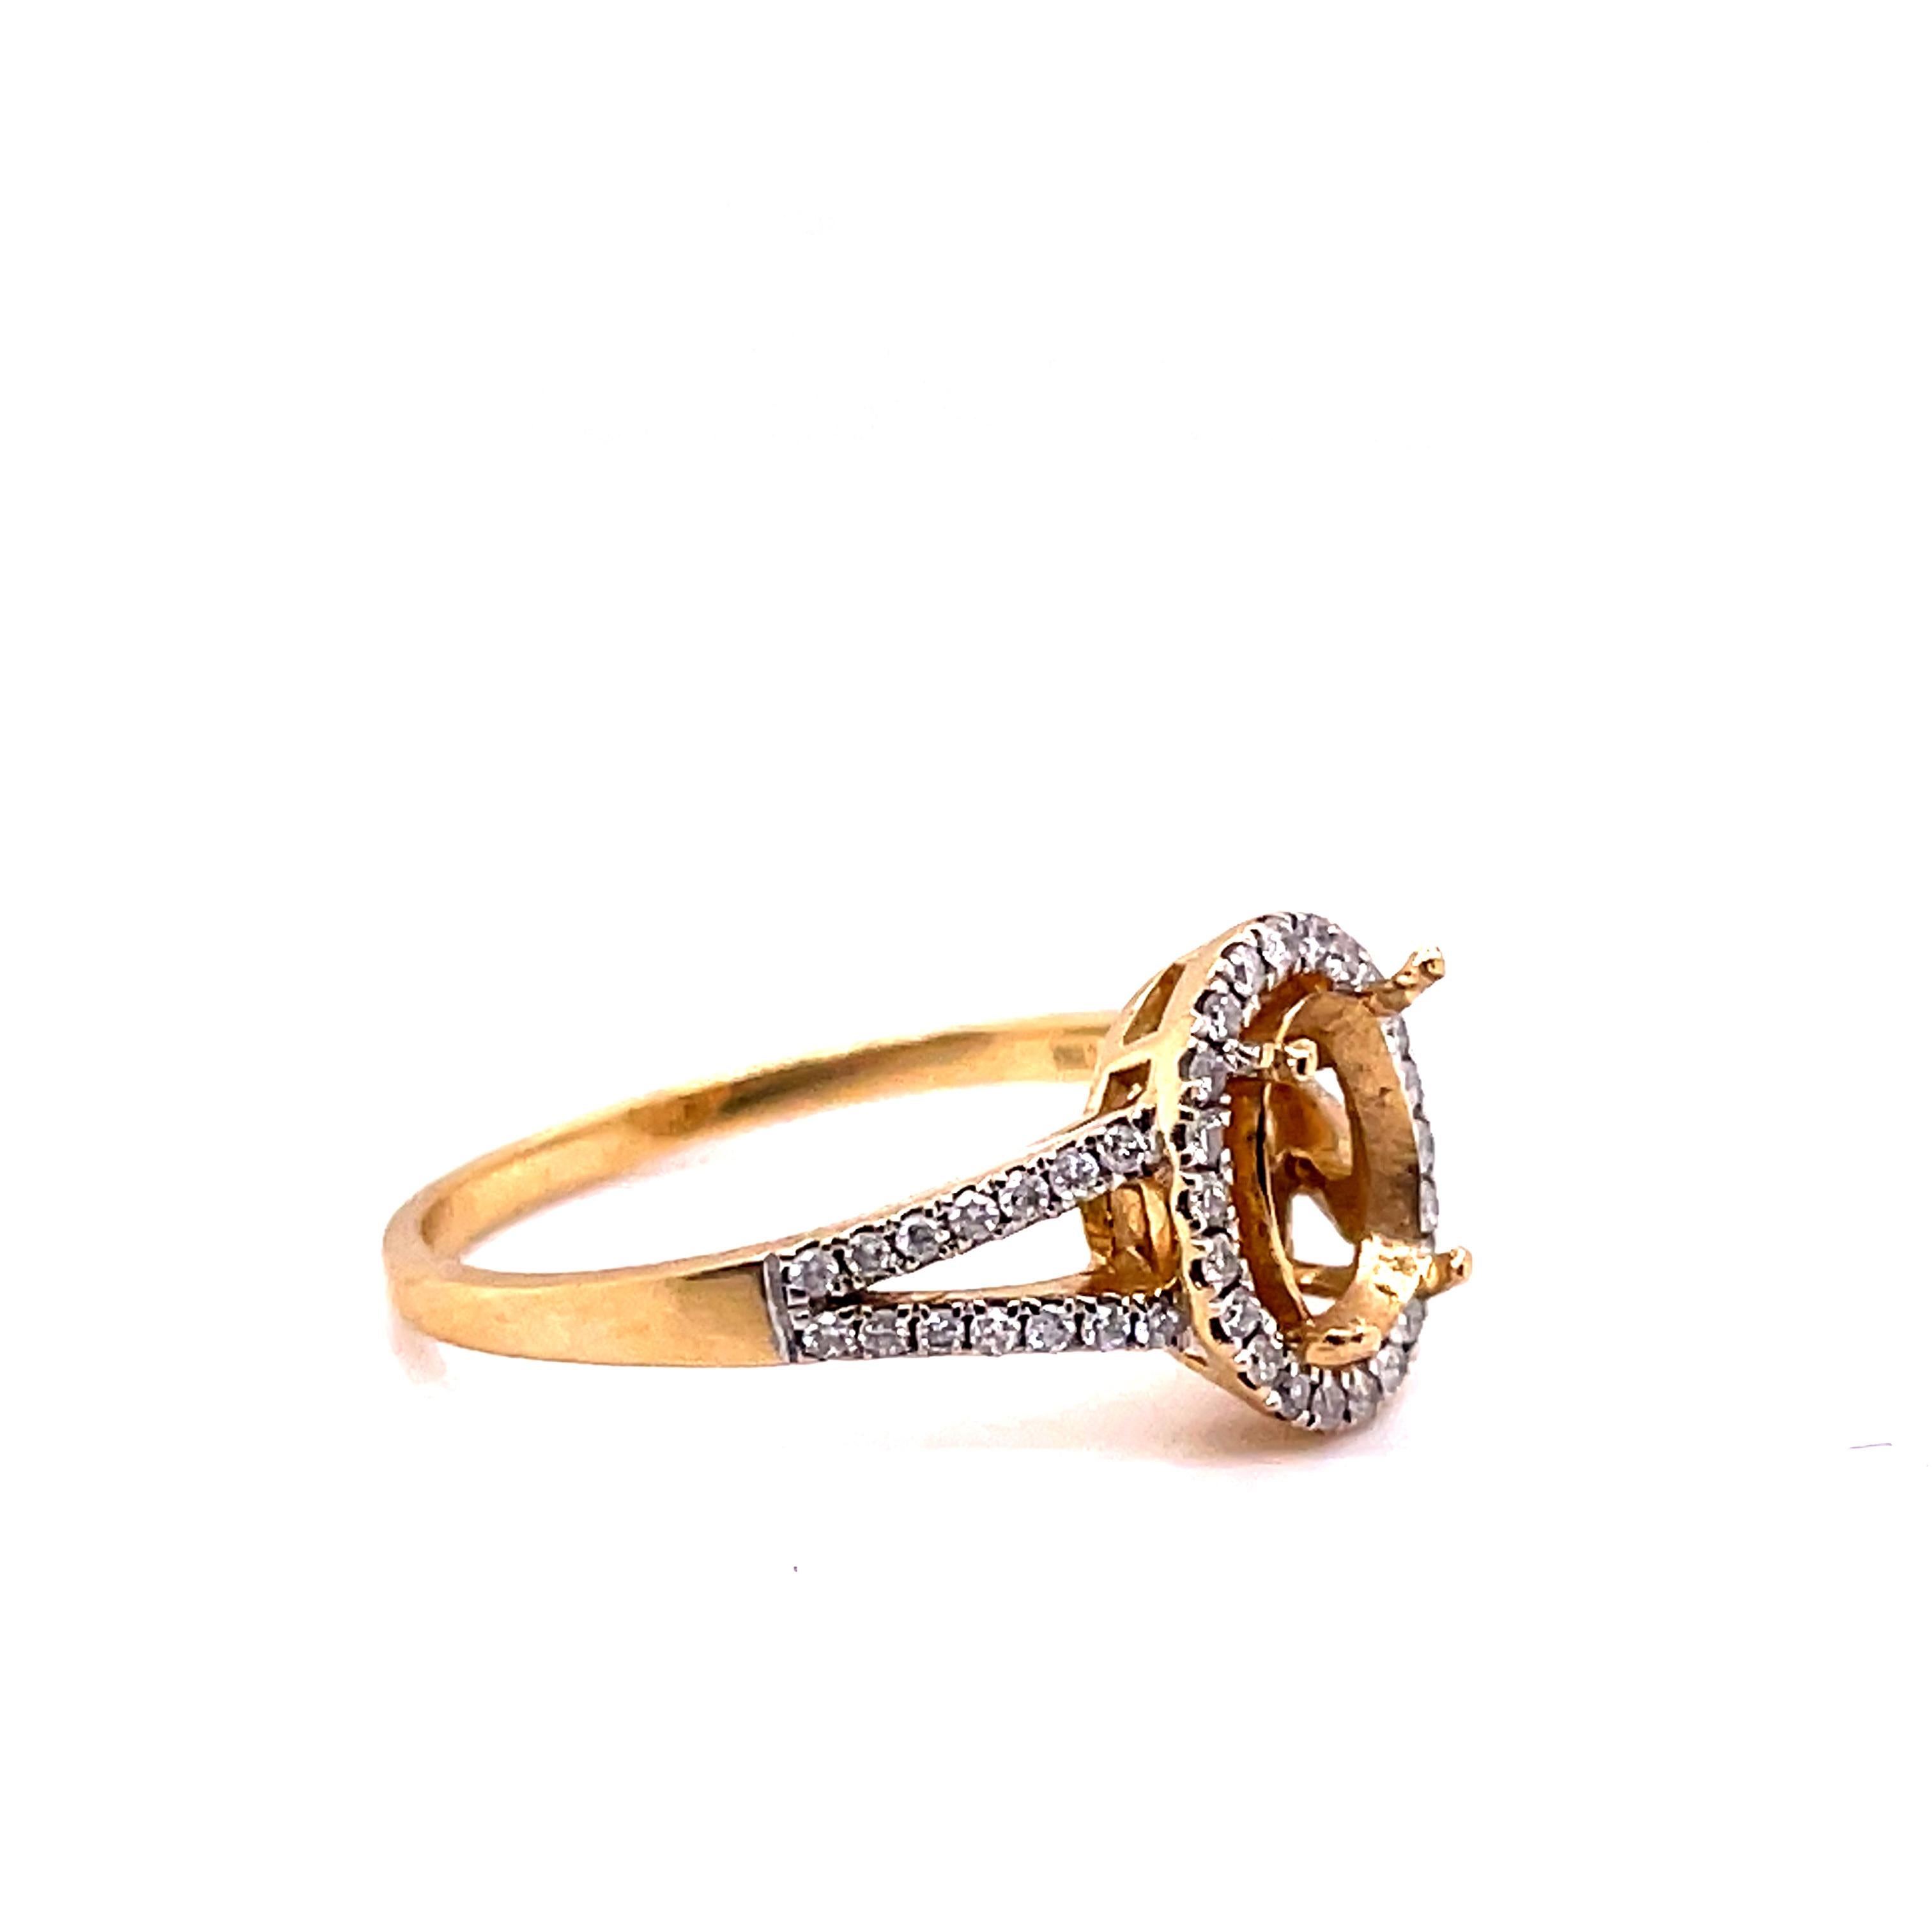 Gender: Ladies
Size: 8 US
Total Weight: 2.9 grams
Purity: 14K Yellow Gold
Shank type: Half Round
Condition: Pre-owned in excellent condition. Quality and Durability was checked by professional jewelers.

The semi-mount will accommodate an